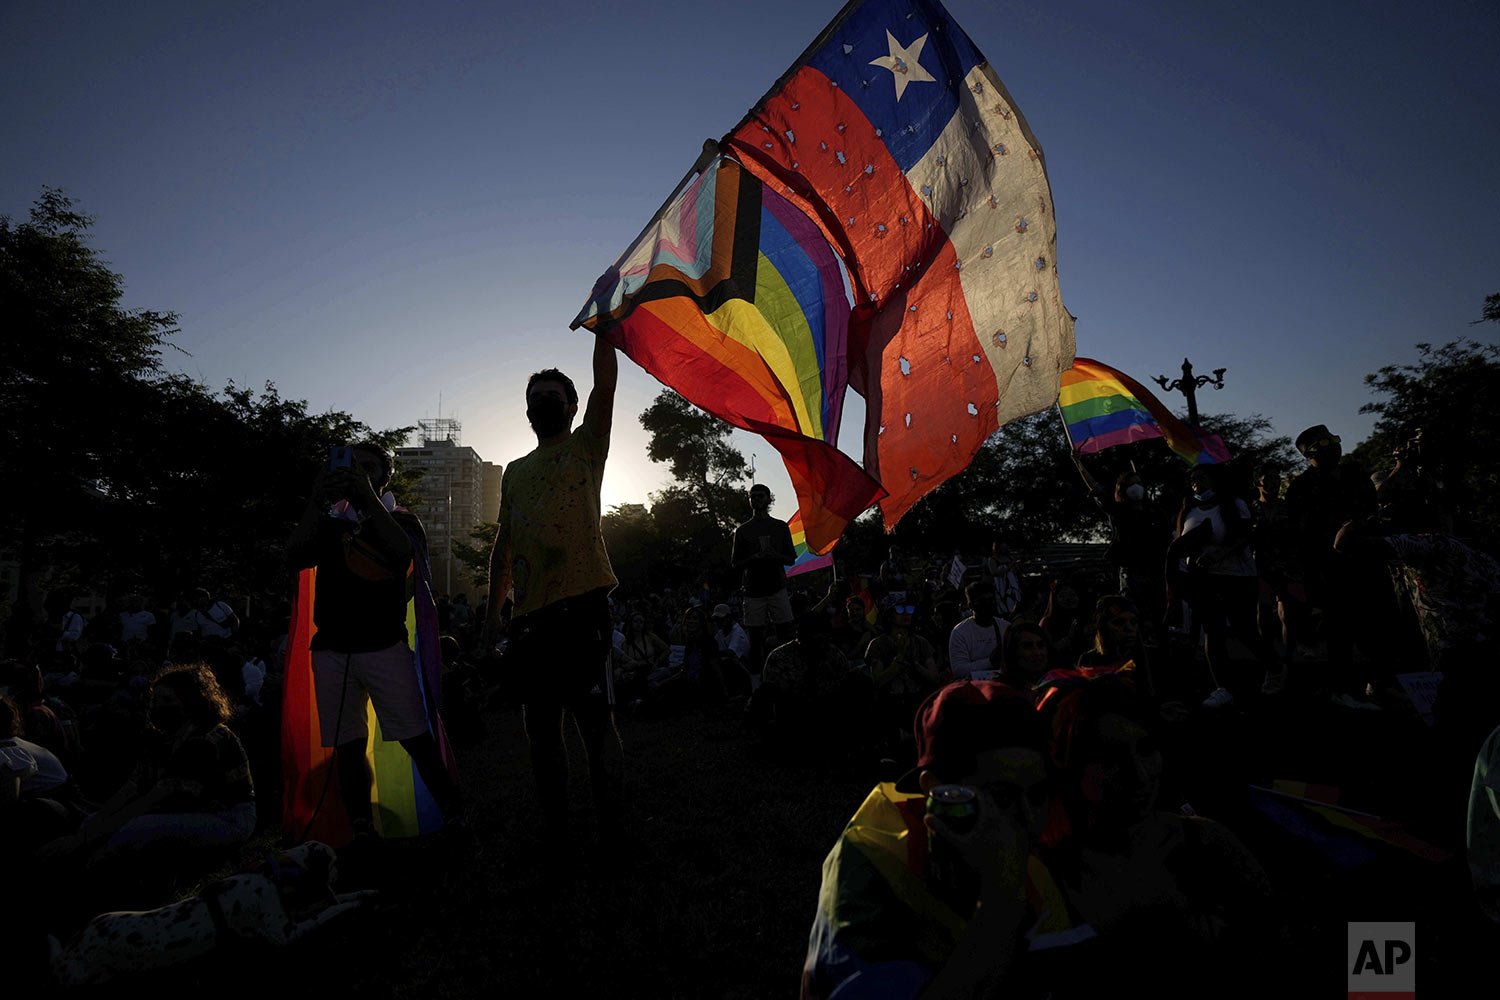  Members of the Movement for Homosexual Integration and Liberation celebrate after lawmakers approved legislation legalizing marriage and adoption by same-sex couples in Santiago, Chile, Dec. 7, 2021. (AP Photo/Esteban Felix) 